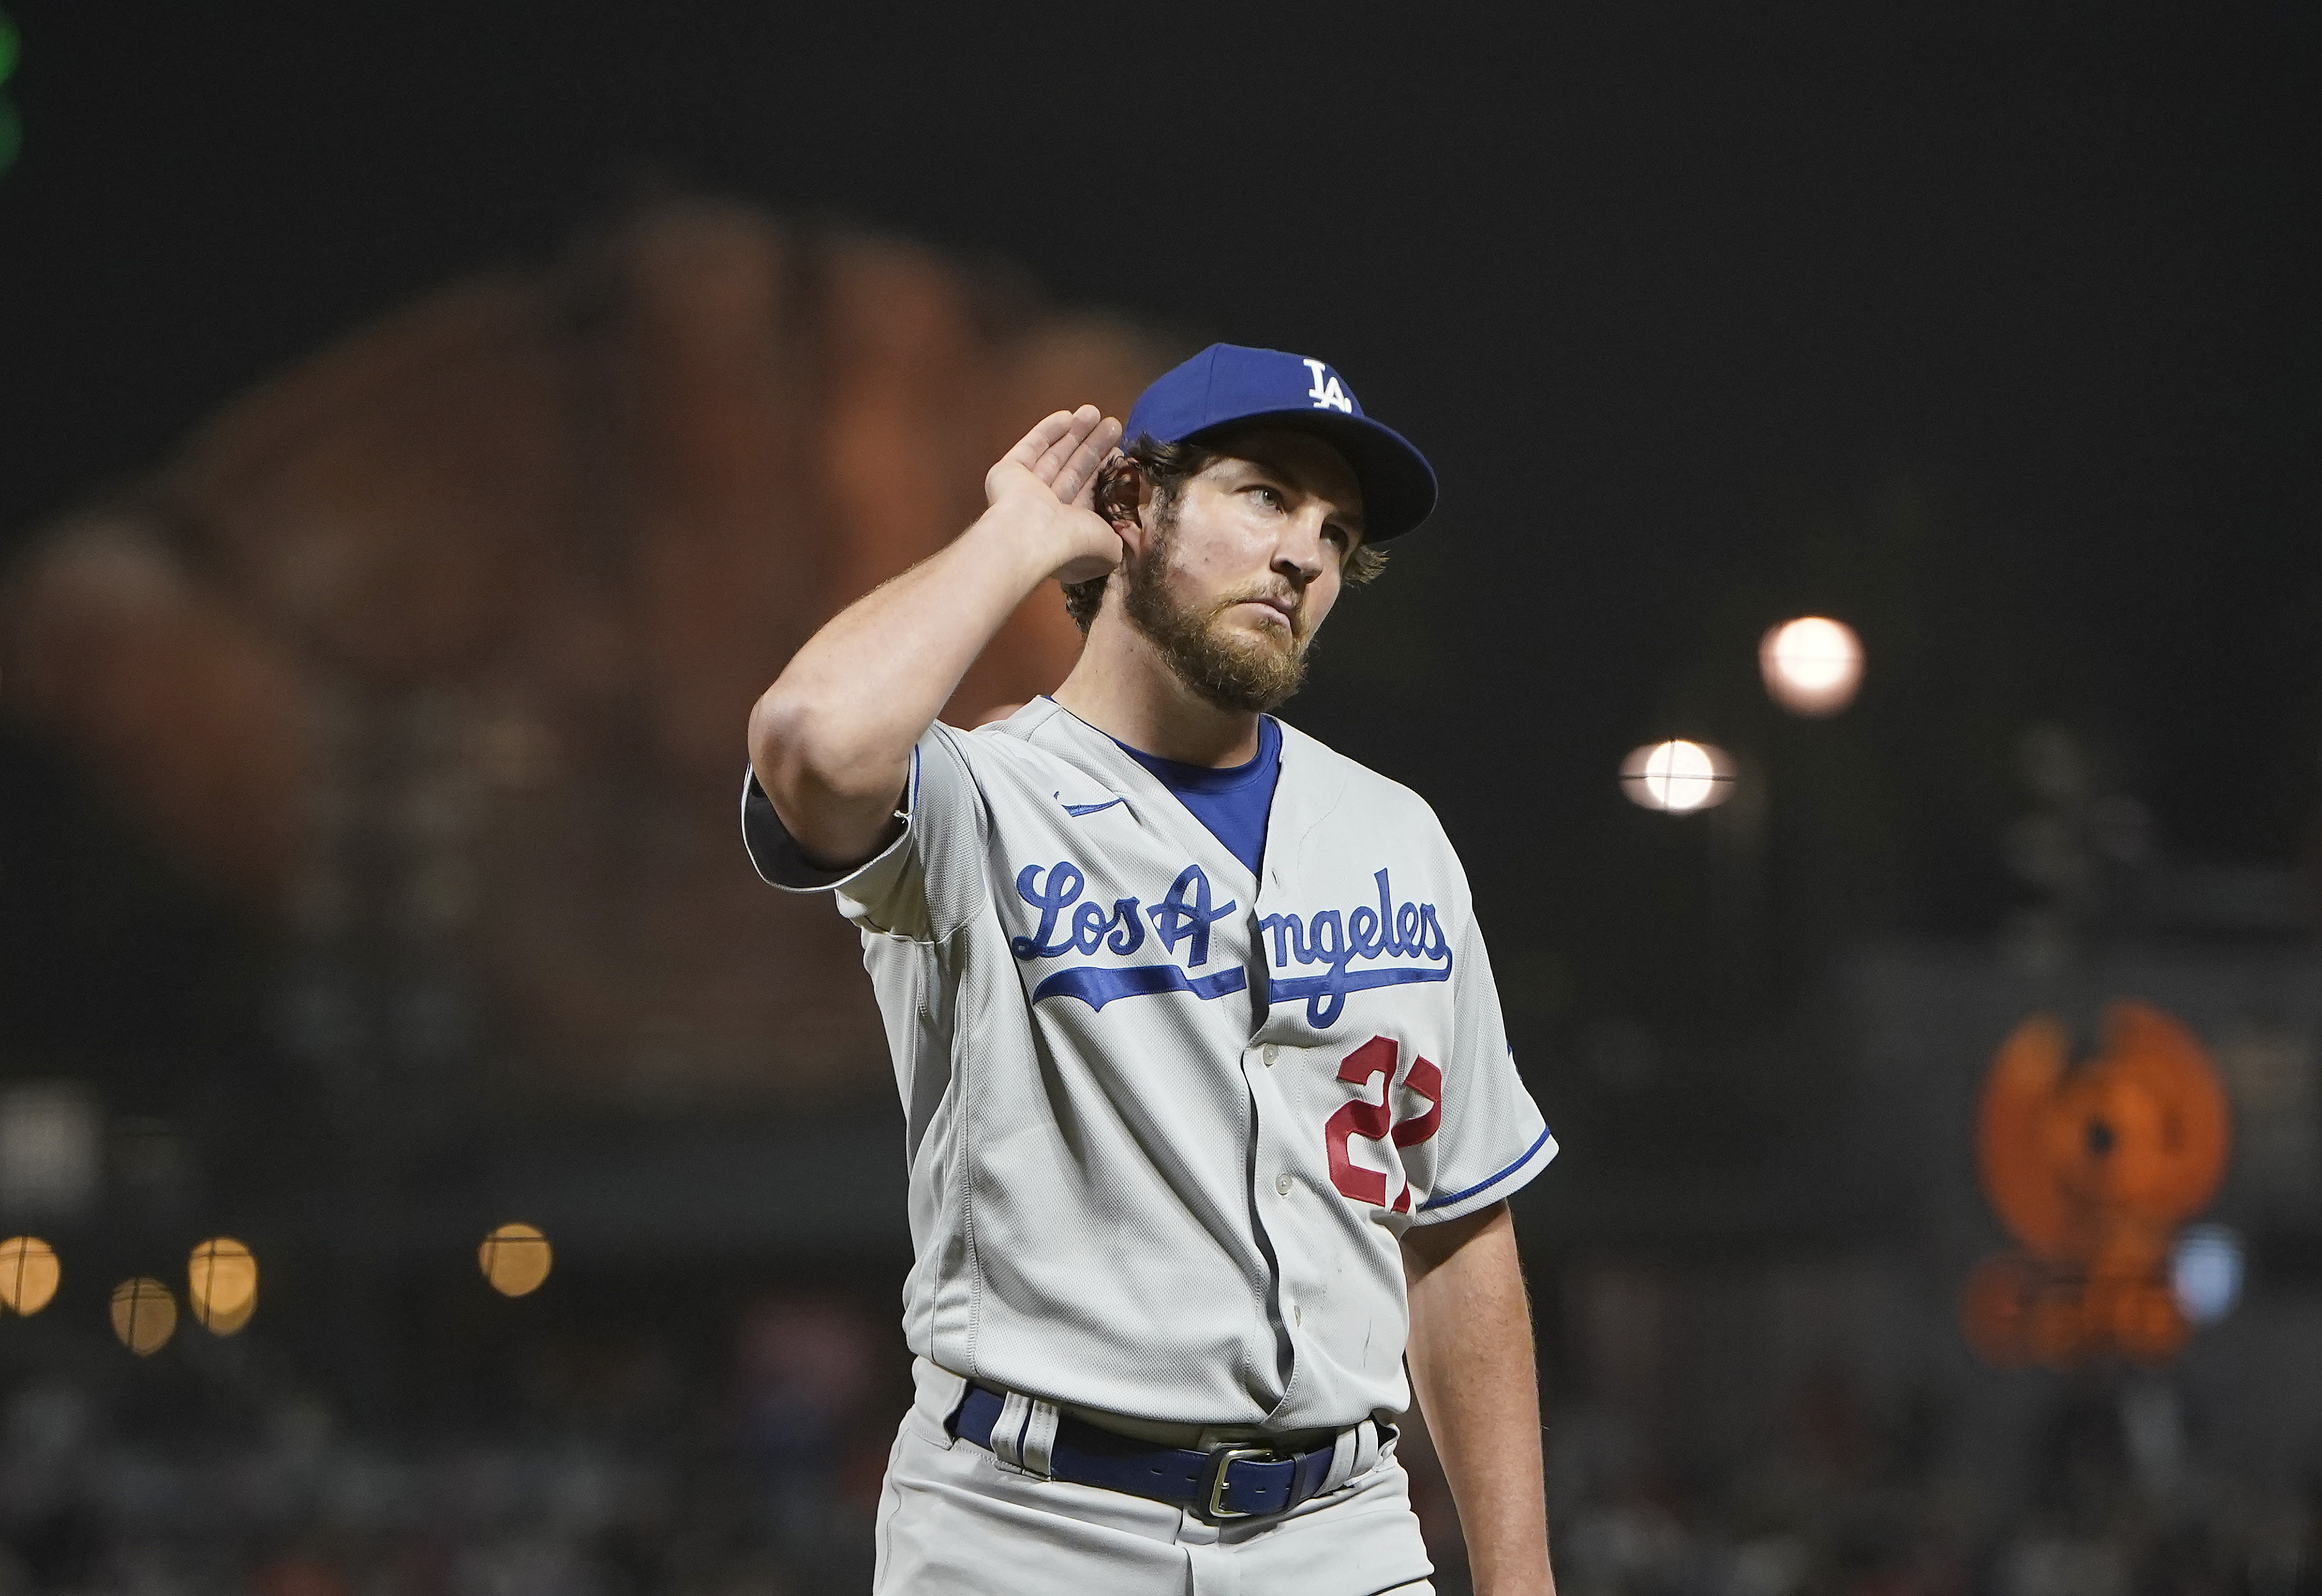 Trevor Bauer of the Los Angeles Dodgers reacts to fans booing him as he leaves the game against the San Francisco Giants in the seventh inning at Oracle Park on May 21, 2021 in San Francisco, California.